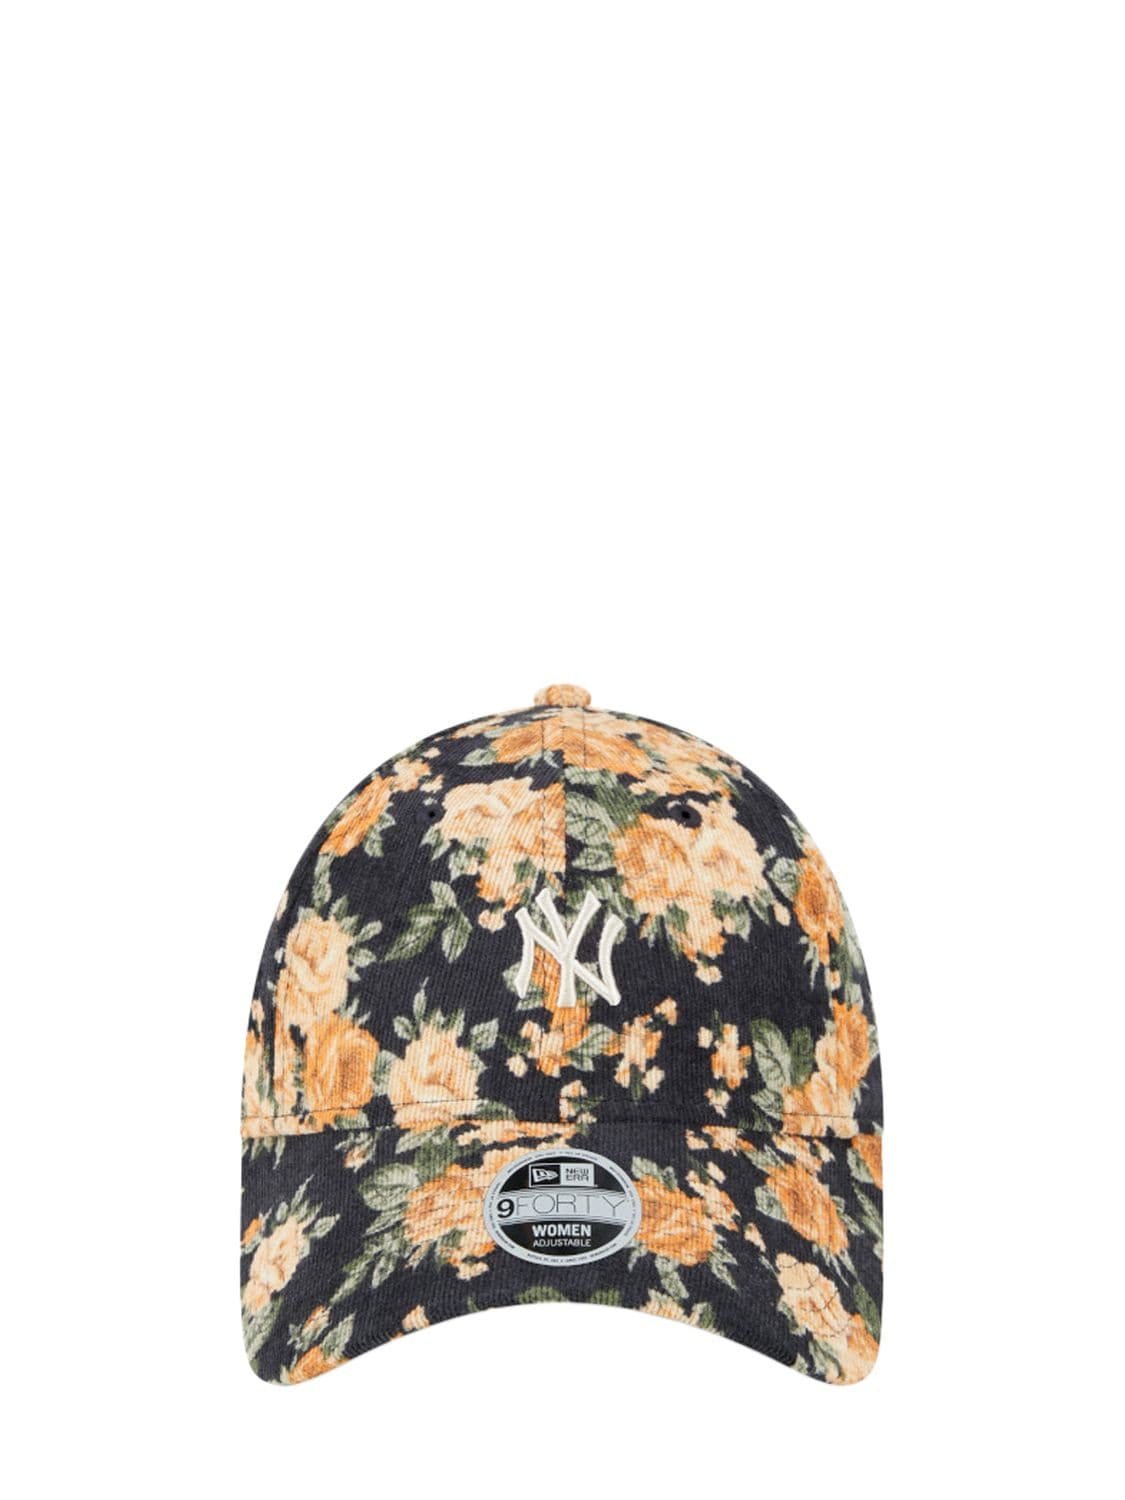 New Era 9forty Ny Yankees Floral Print Cap In Blue,orange